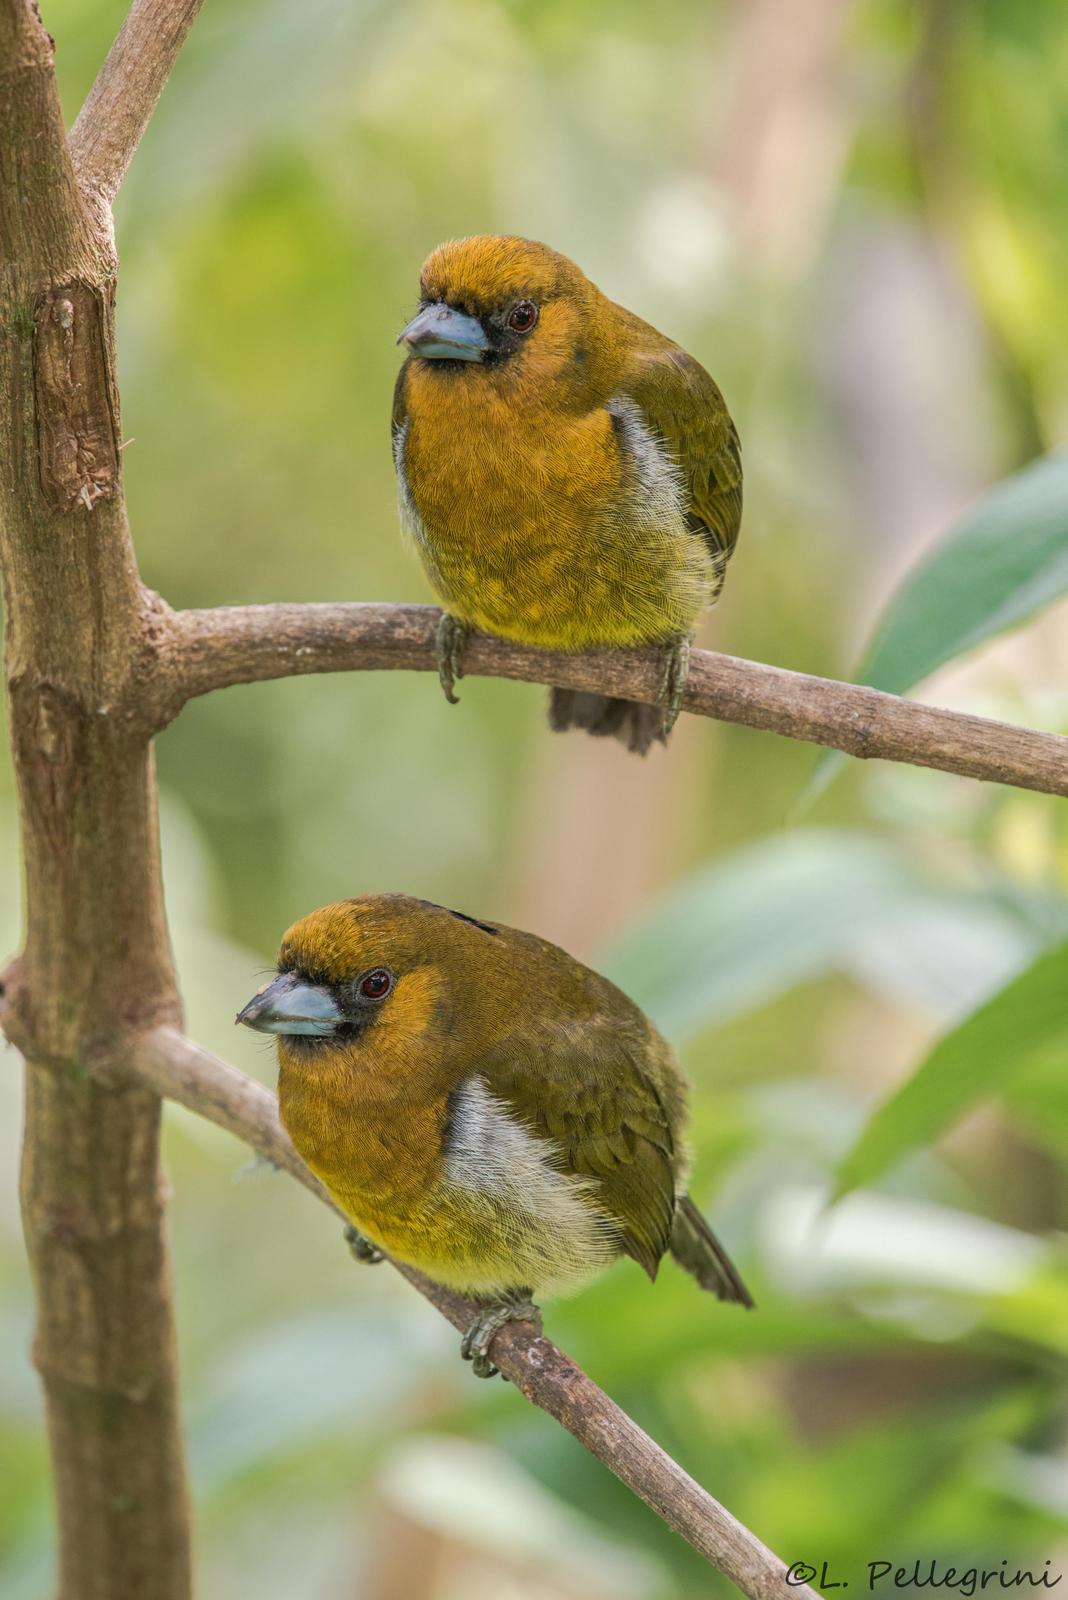 Prong-billed Barbet Photo by Laurence Pellegrini